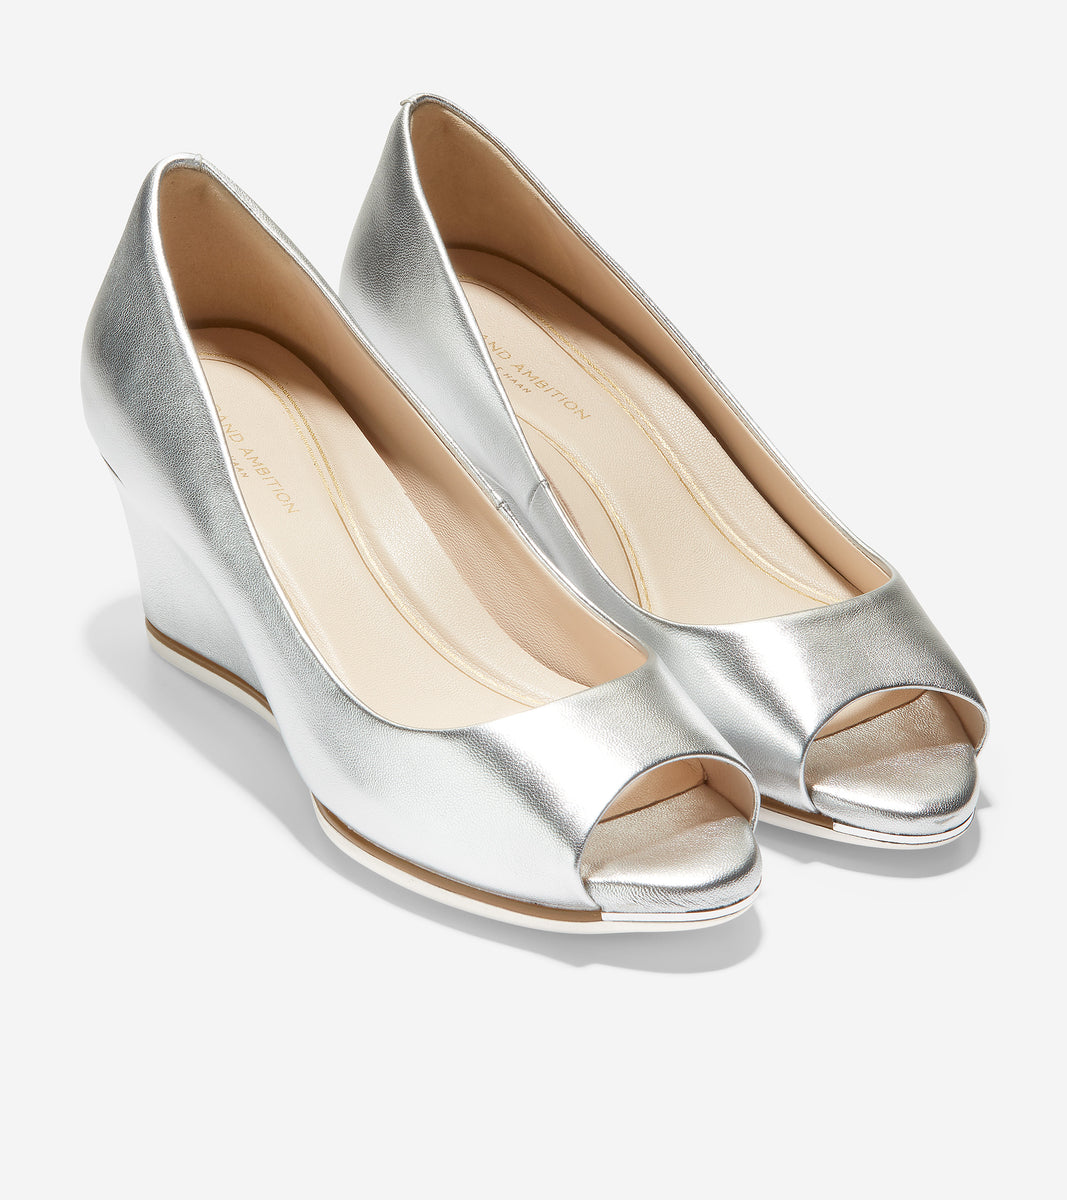 ColeHaan-Grand Ambition Open Toe Wedge -w16907-Silver Talca-Natural